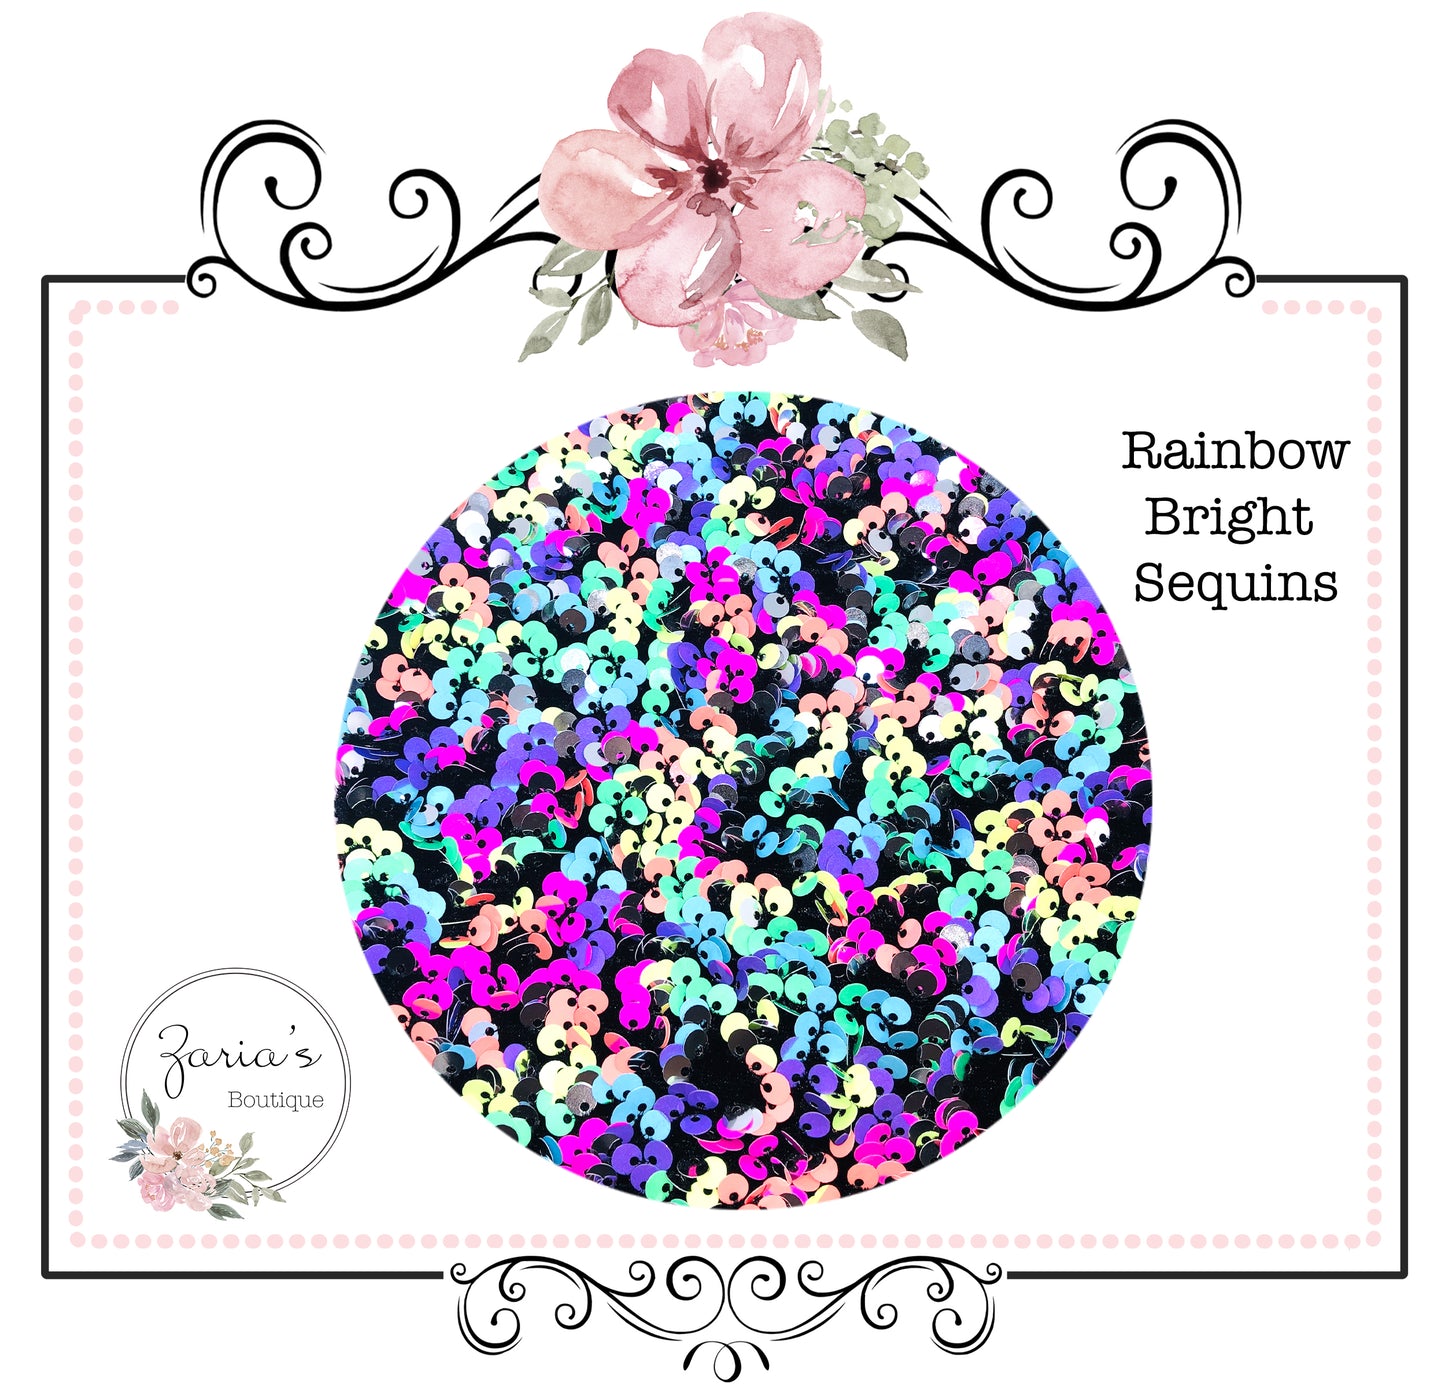 Iridescent Sequin Bow Fabric ~ White or Rainbow Brights